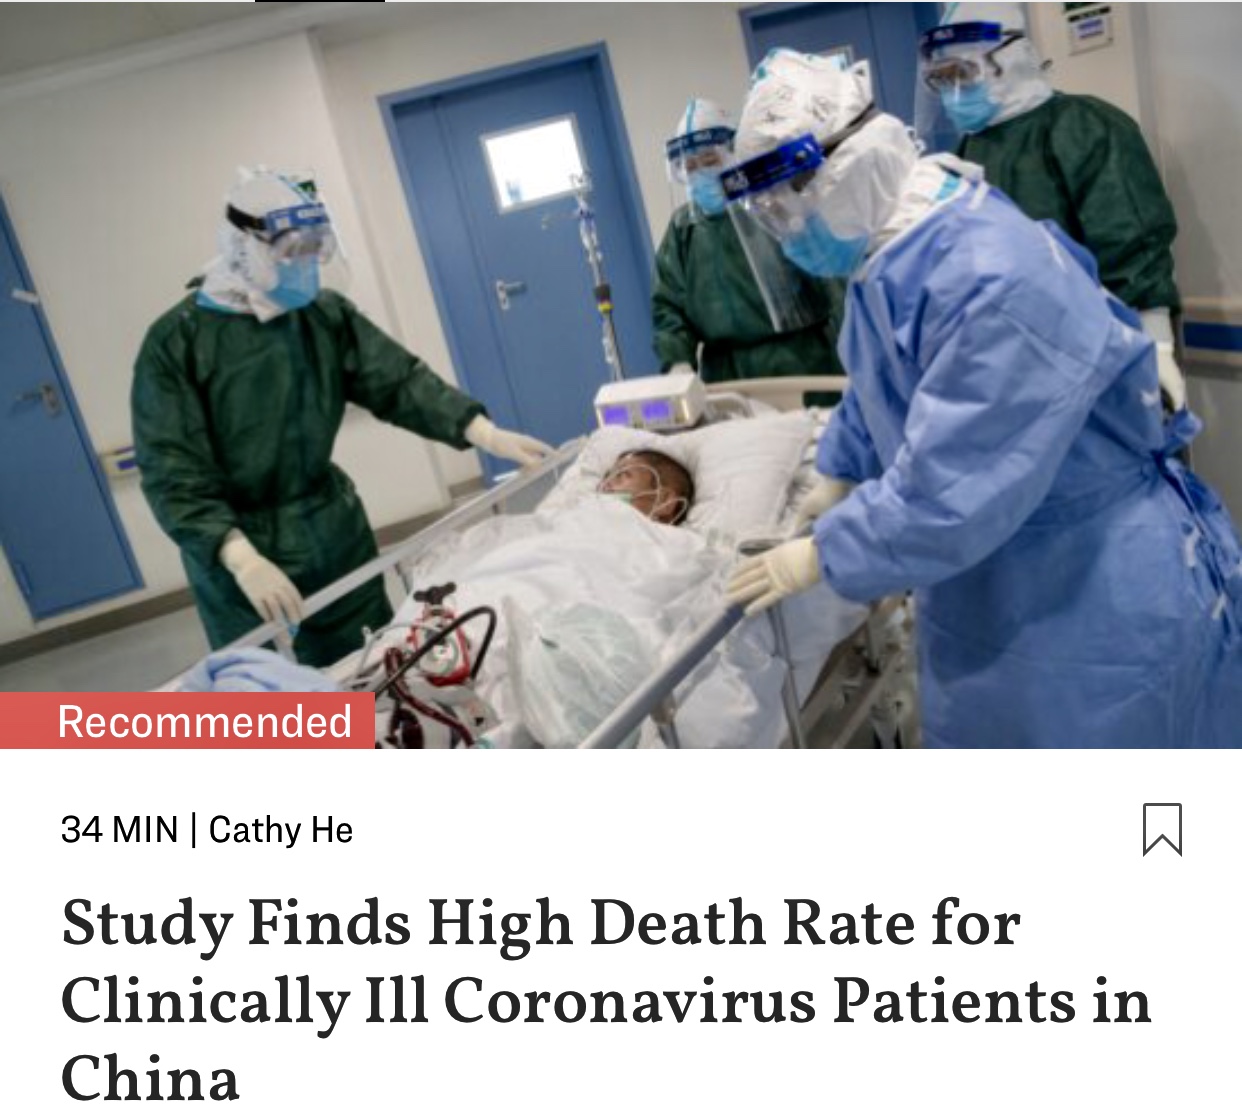 High Death Rate for Clinically Ill Coronavirus Patients in China